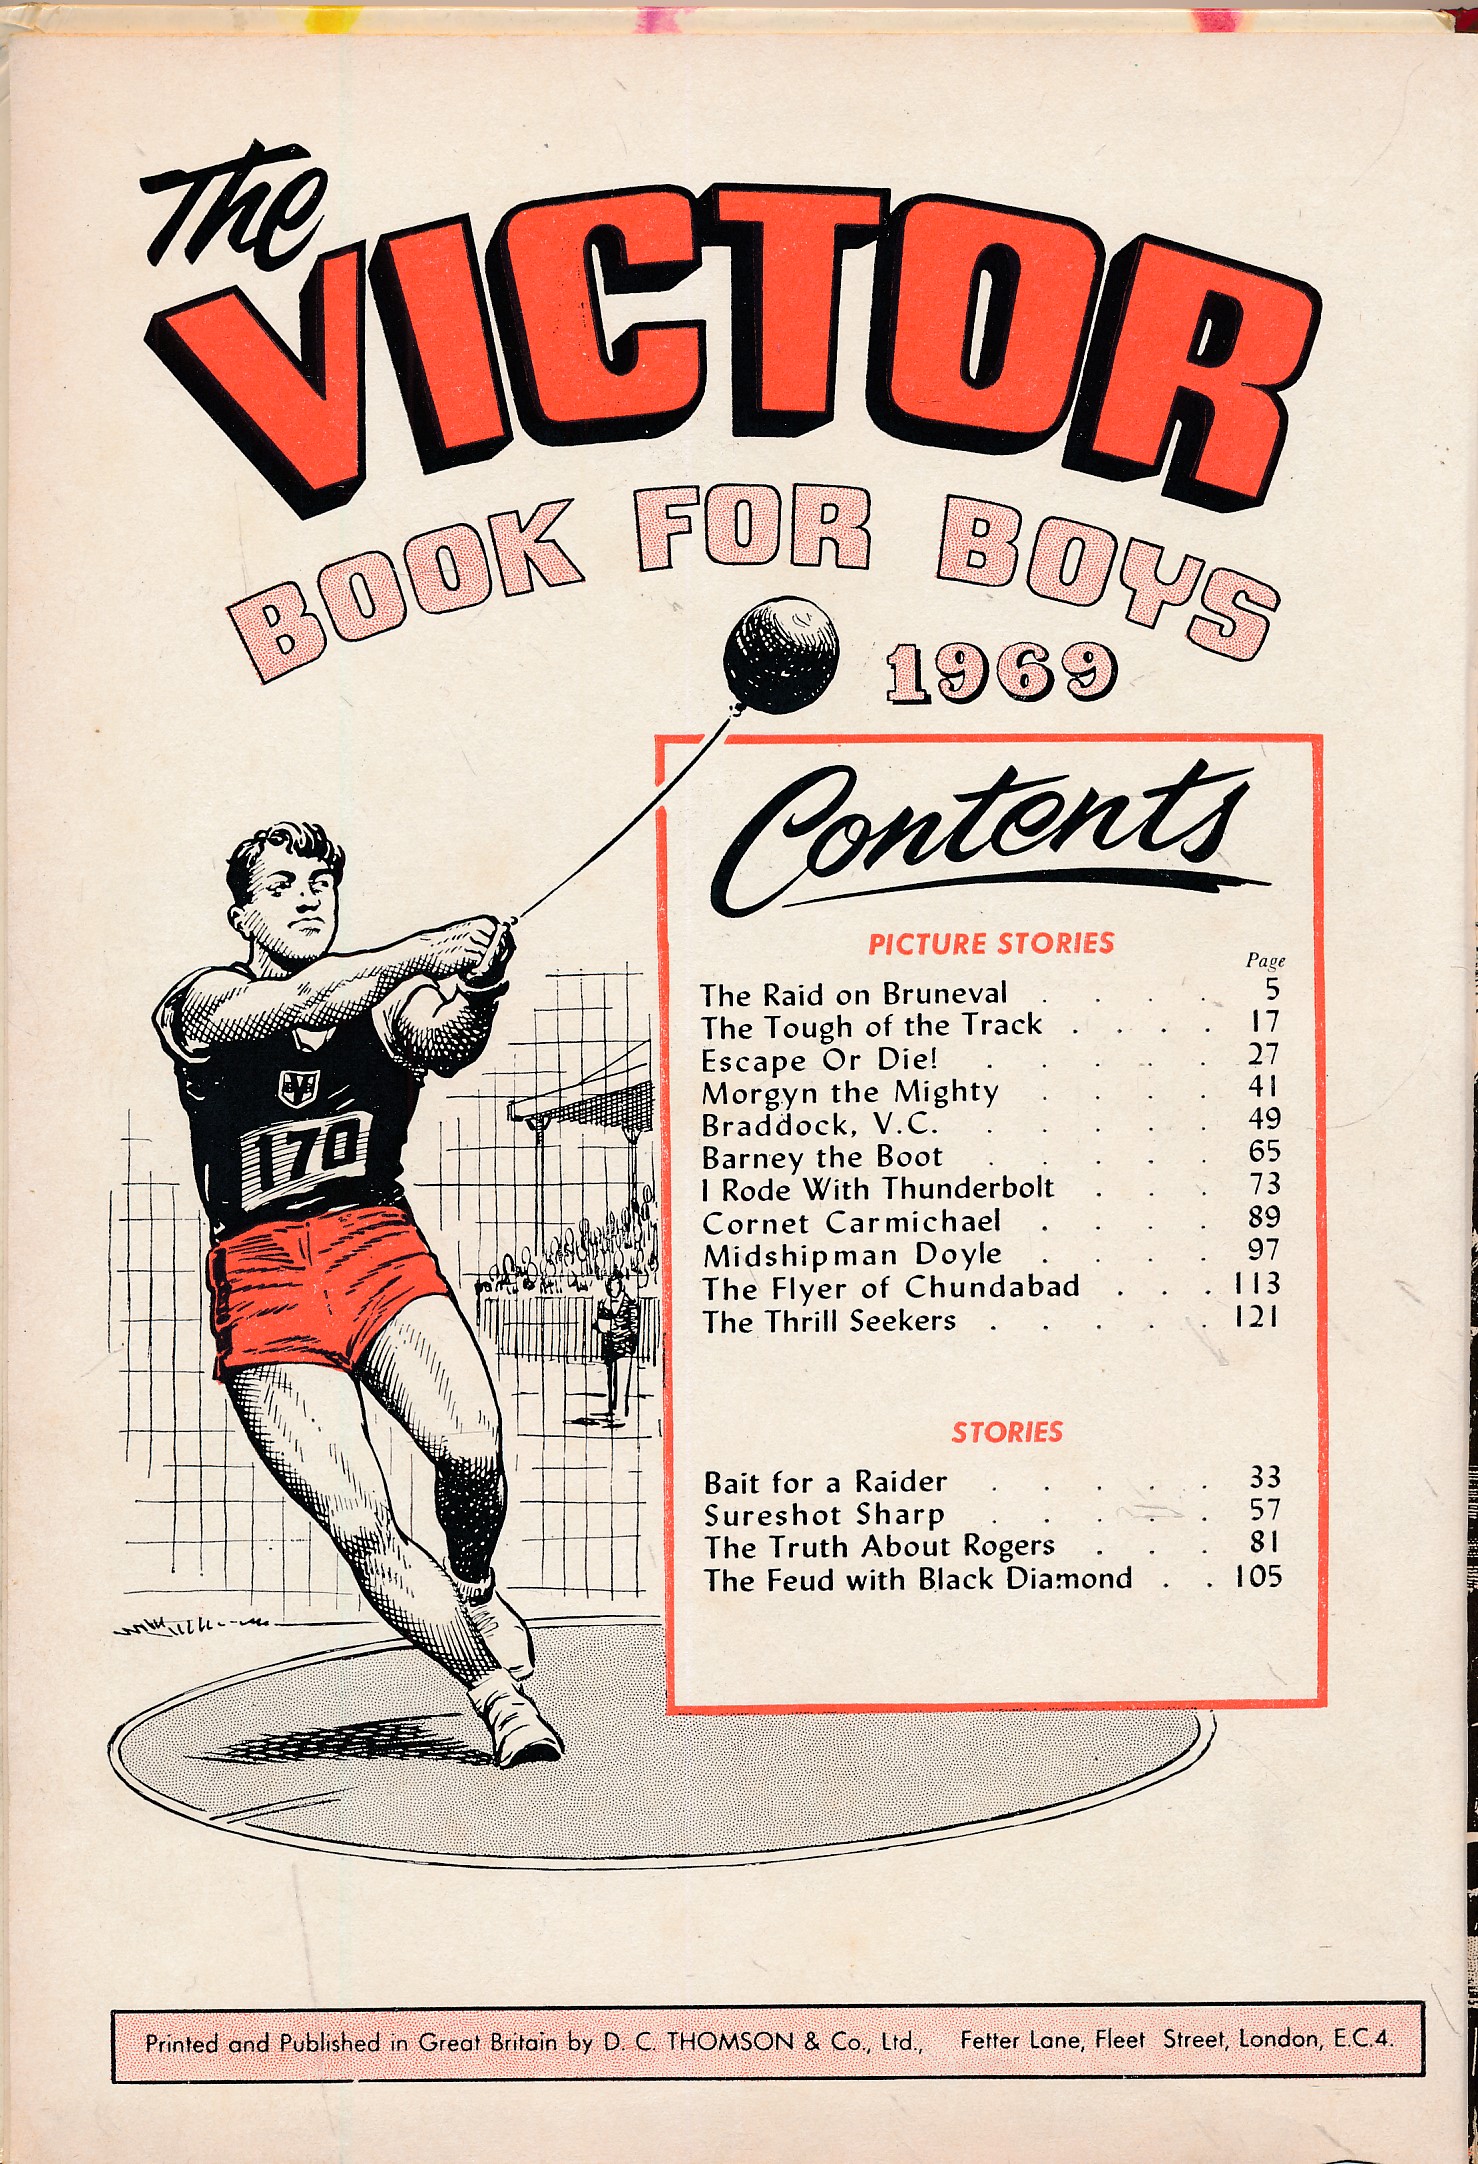 The Victor Book for Boys 1969